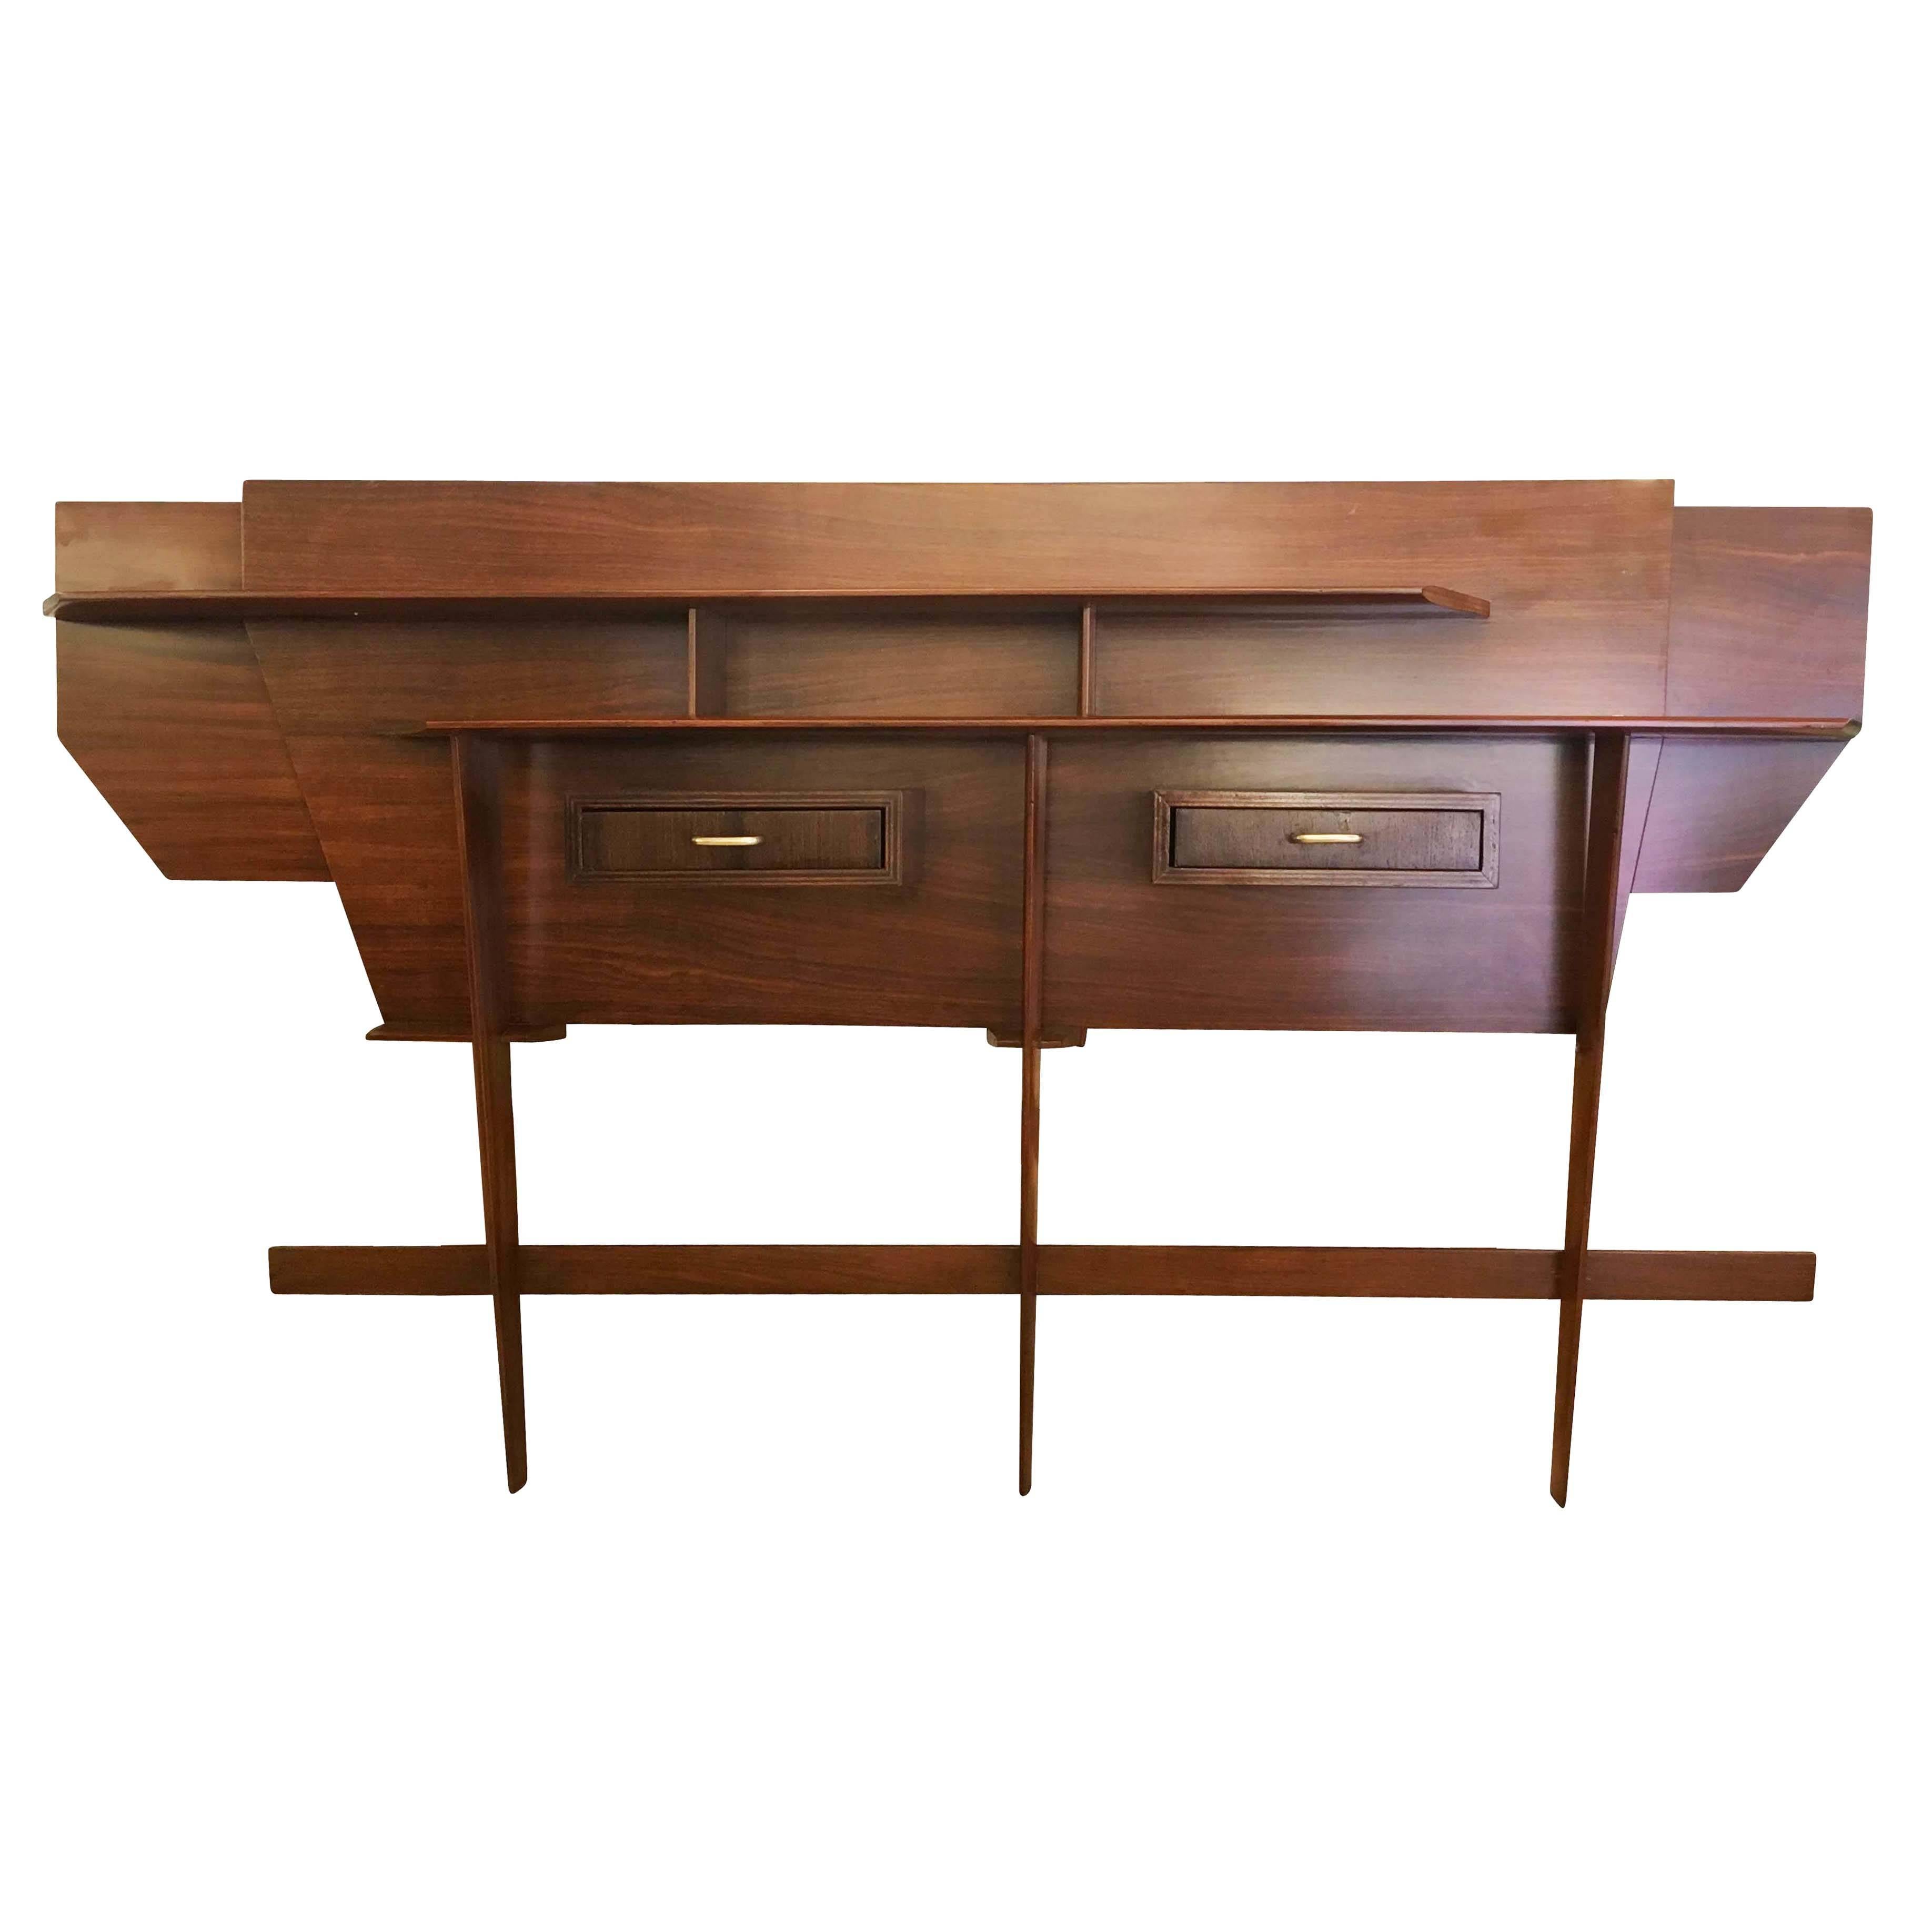 Italian wall console unit perfect for an entry or hallway. Made of wood with brass details, the staggered and tapered components give the piece a sense of movement. Has two drawers.